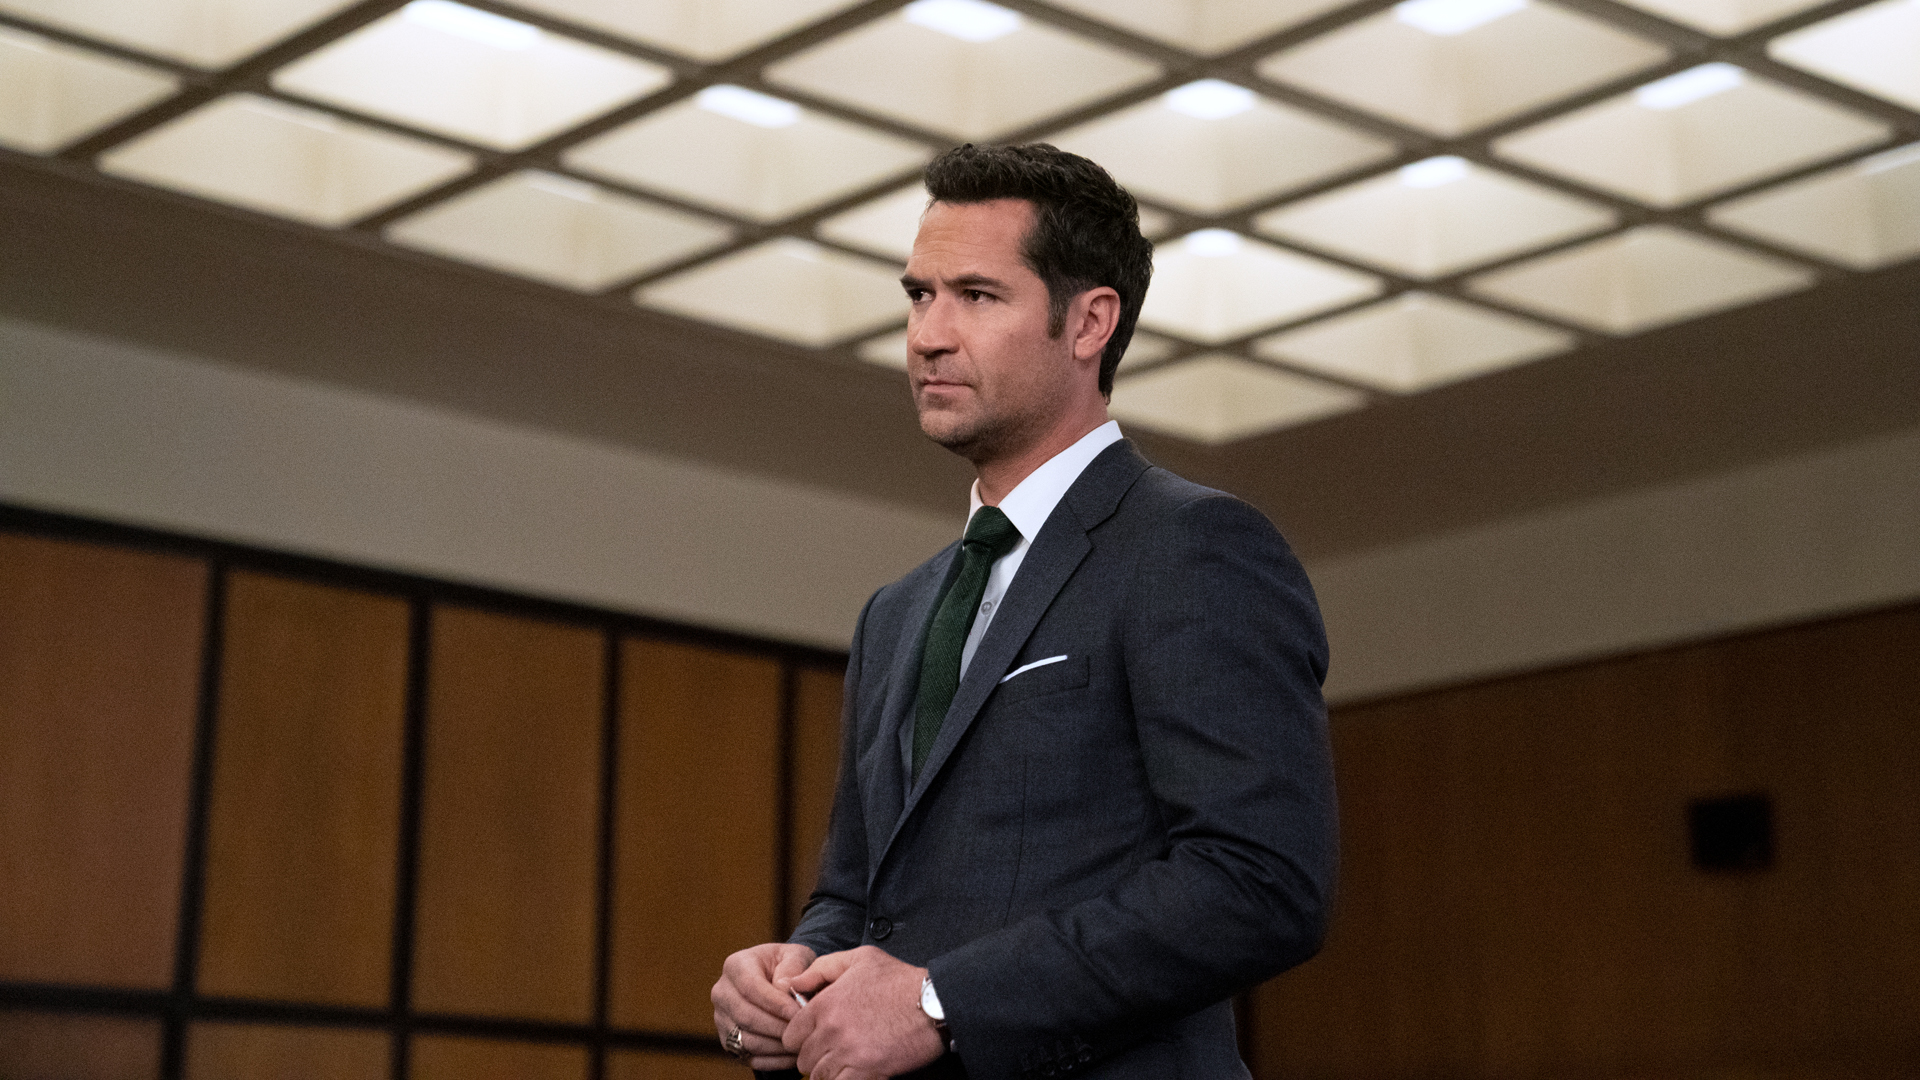 Mickey Haller looks at someone off camera in a court room in The Lincoln Lawyer season 2